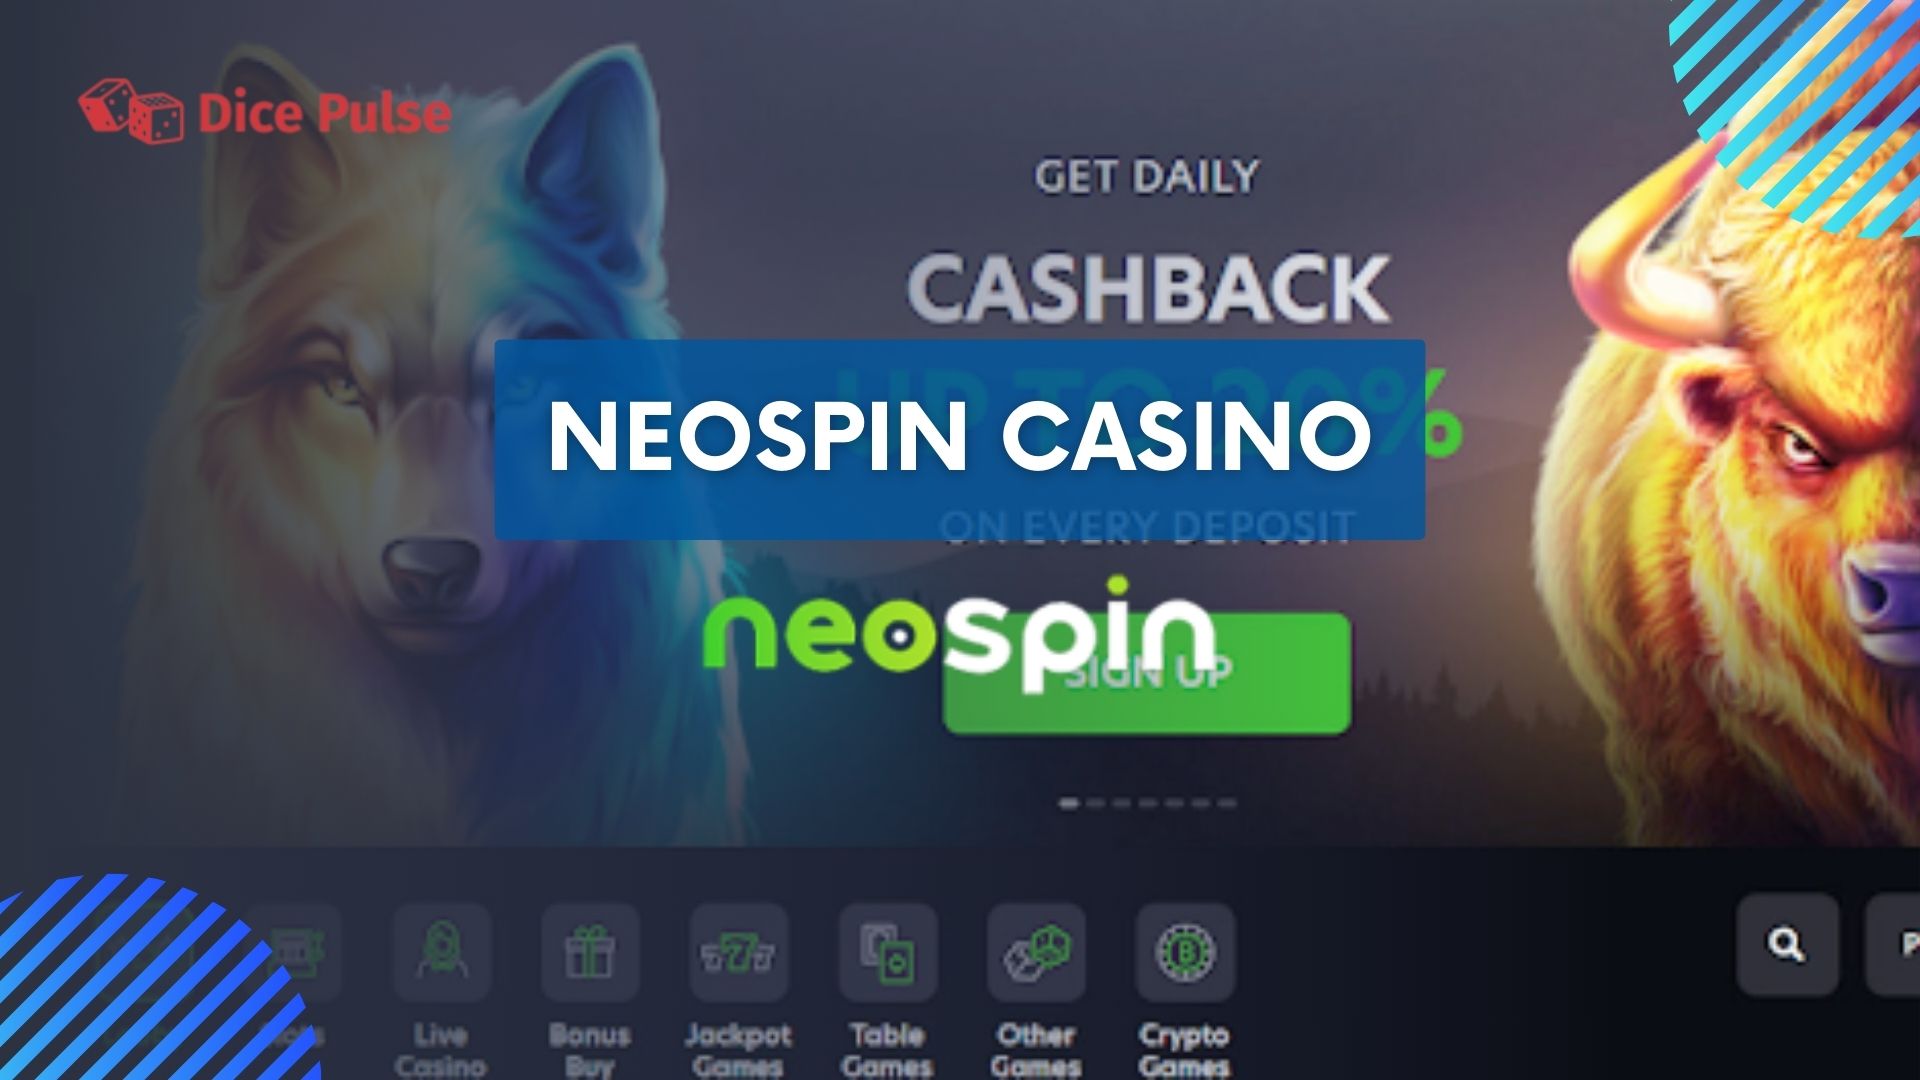 Discover new gaming experience with Neospin Casino